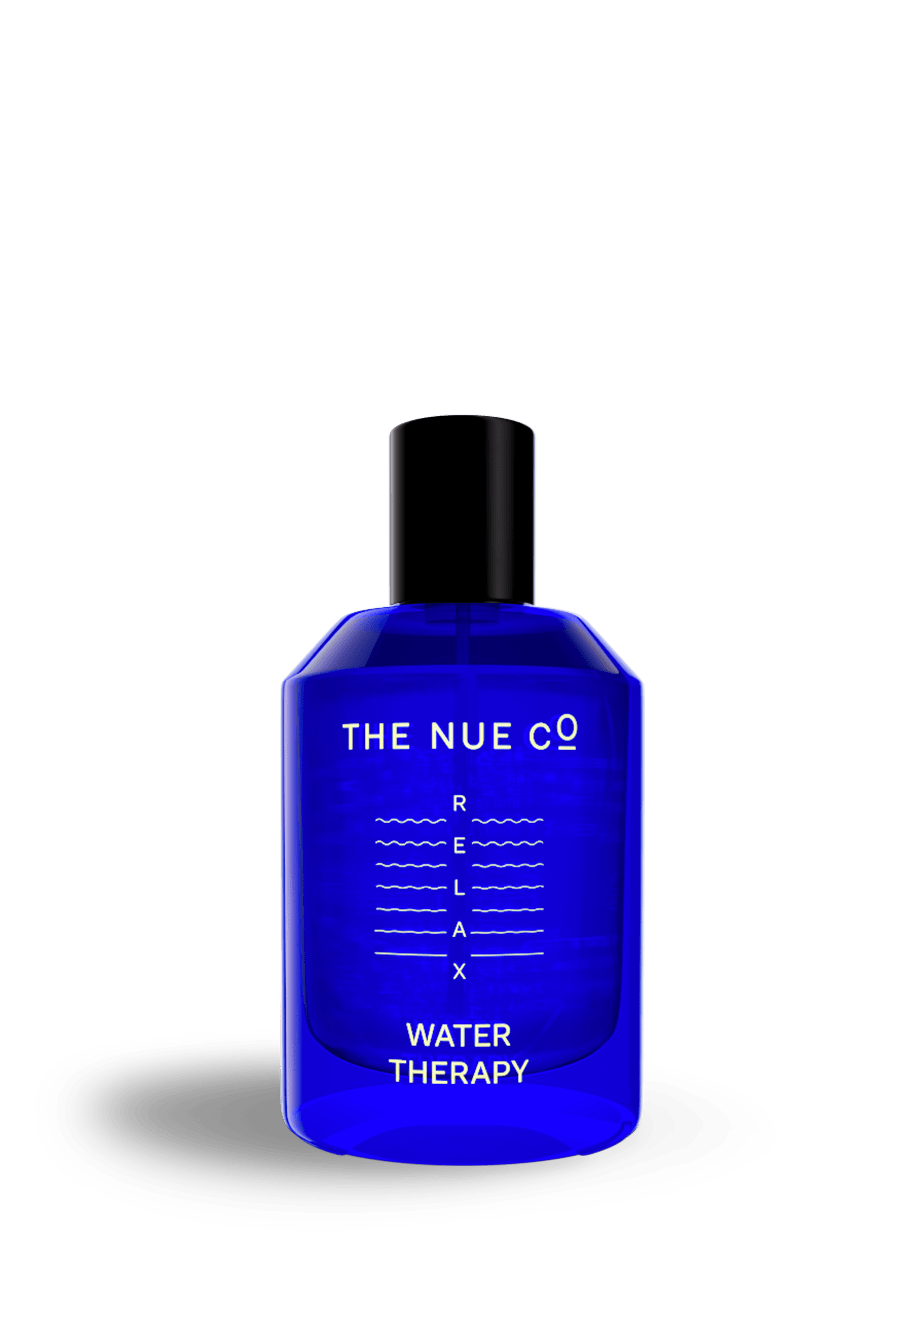 WATER THERAPY single The Nue Co. UK 